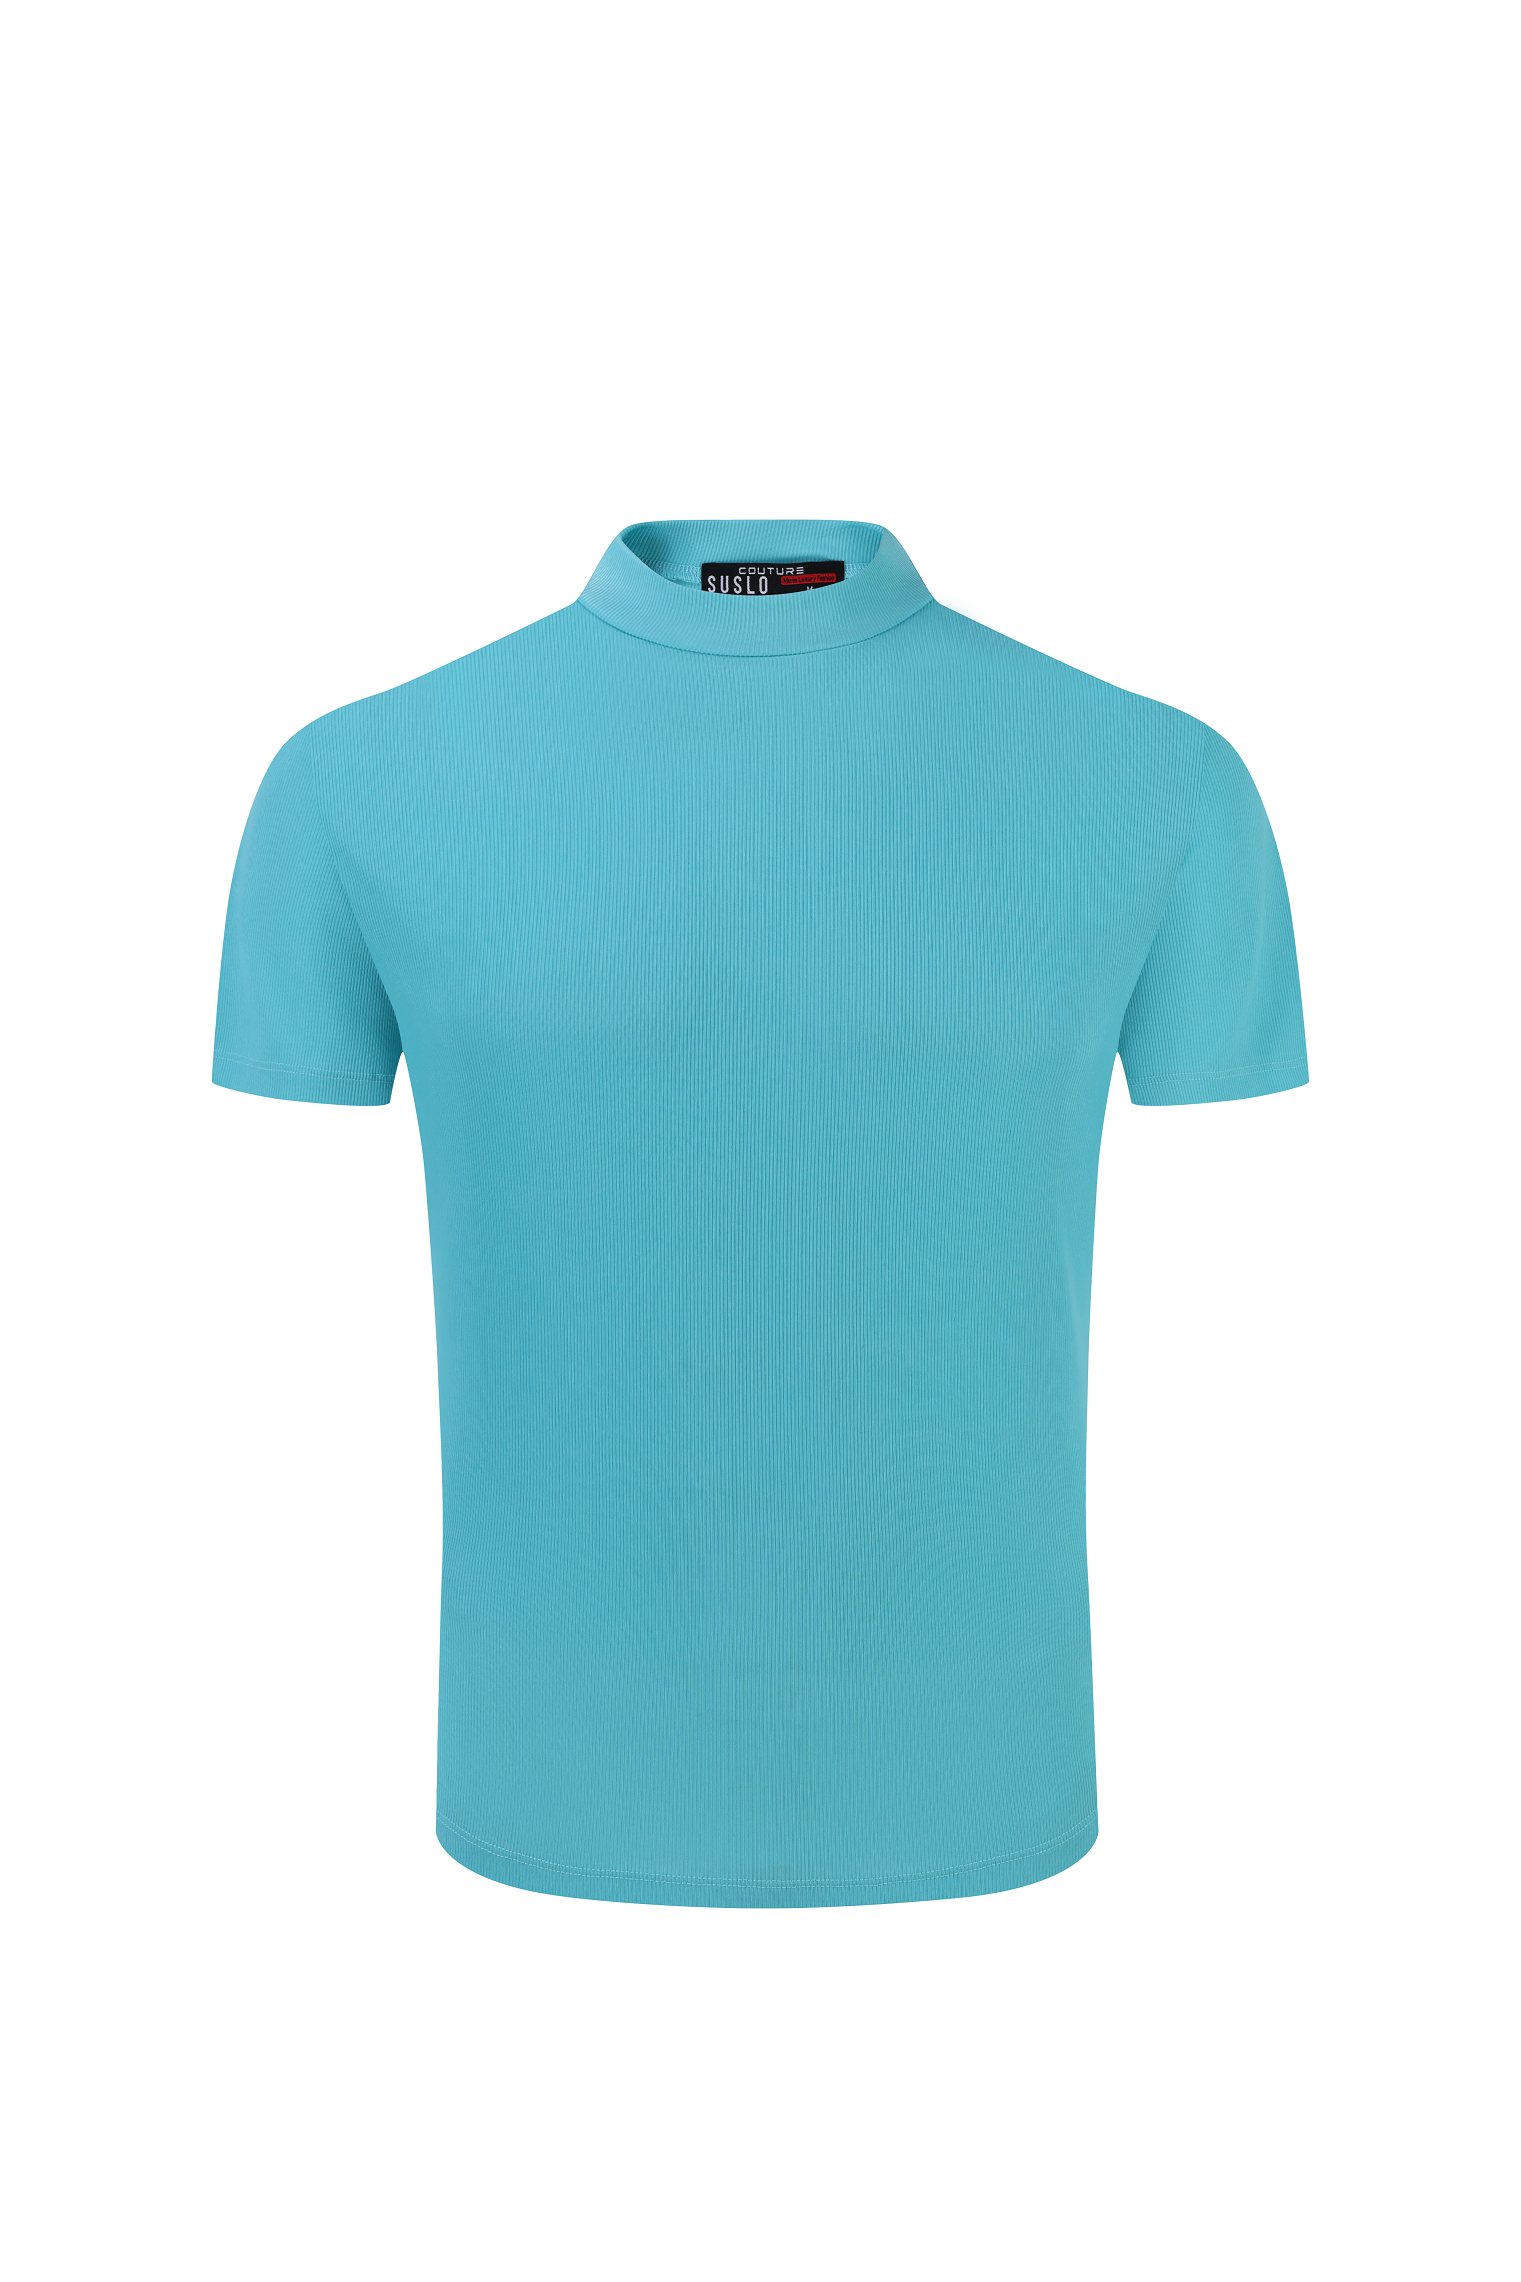 Stretch Luxury Ribbed Tee - Turquoise